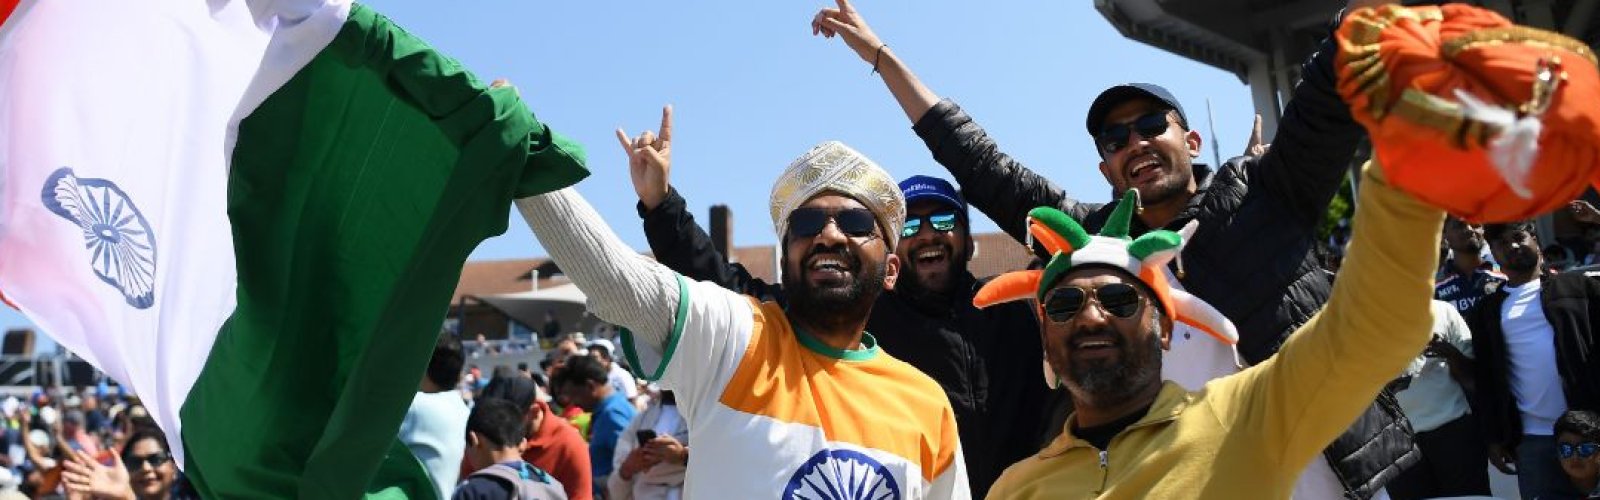 Cricket fans of India react in the crowd - Cricket ticket and travel package